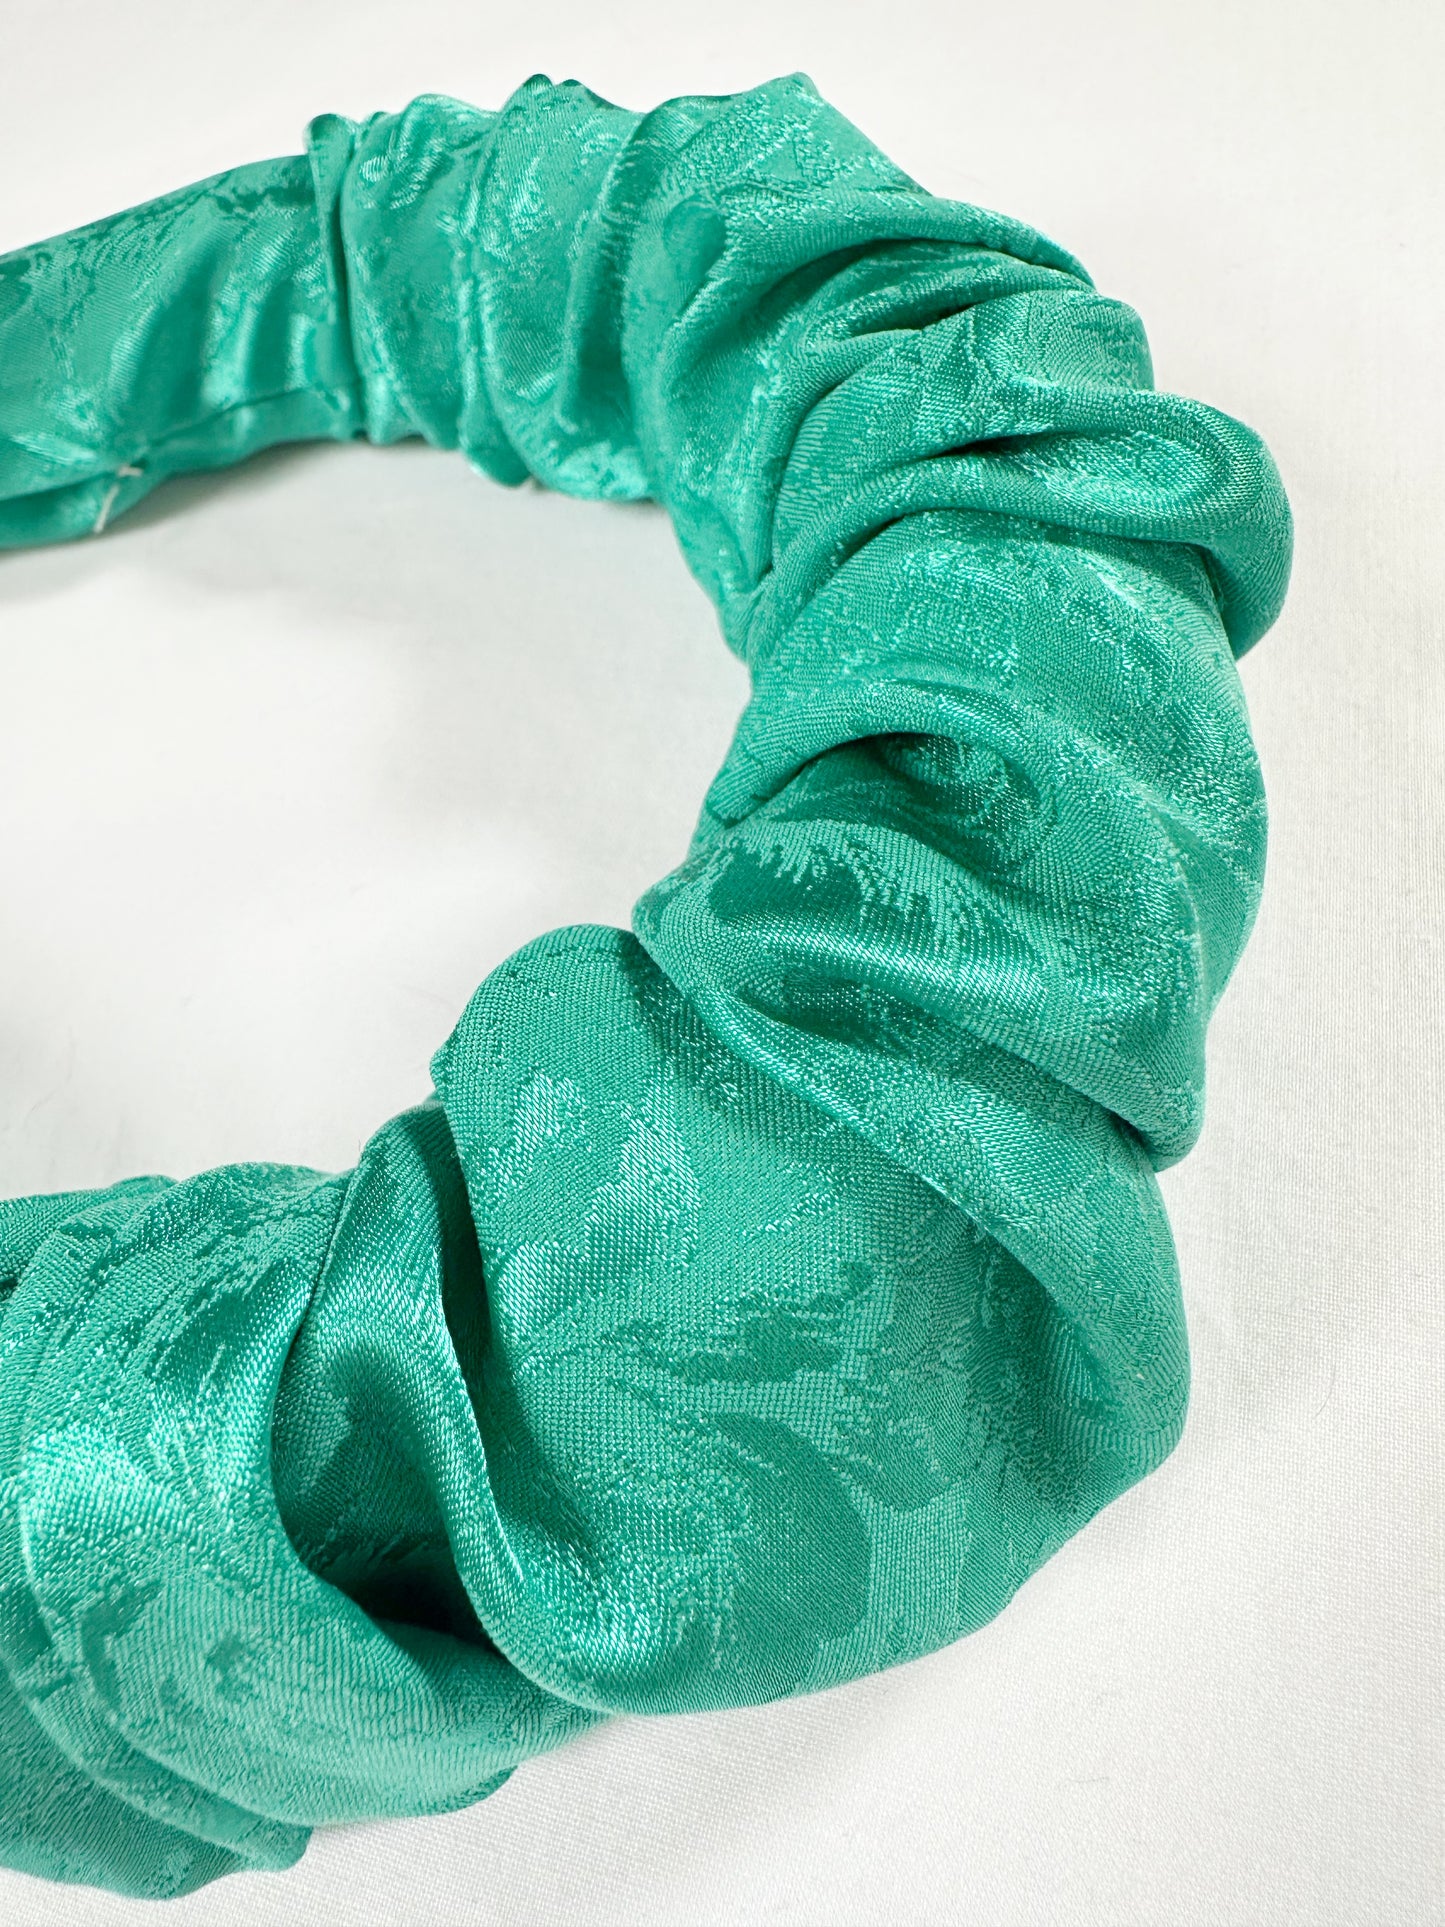 Ruffle Headband in turquoise silky floral